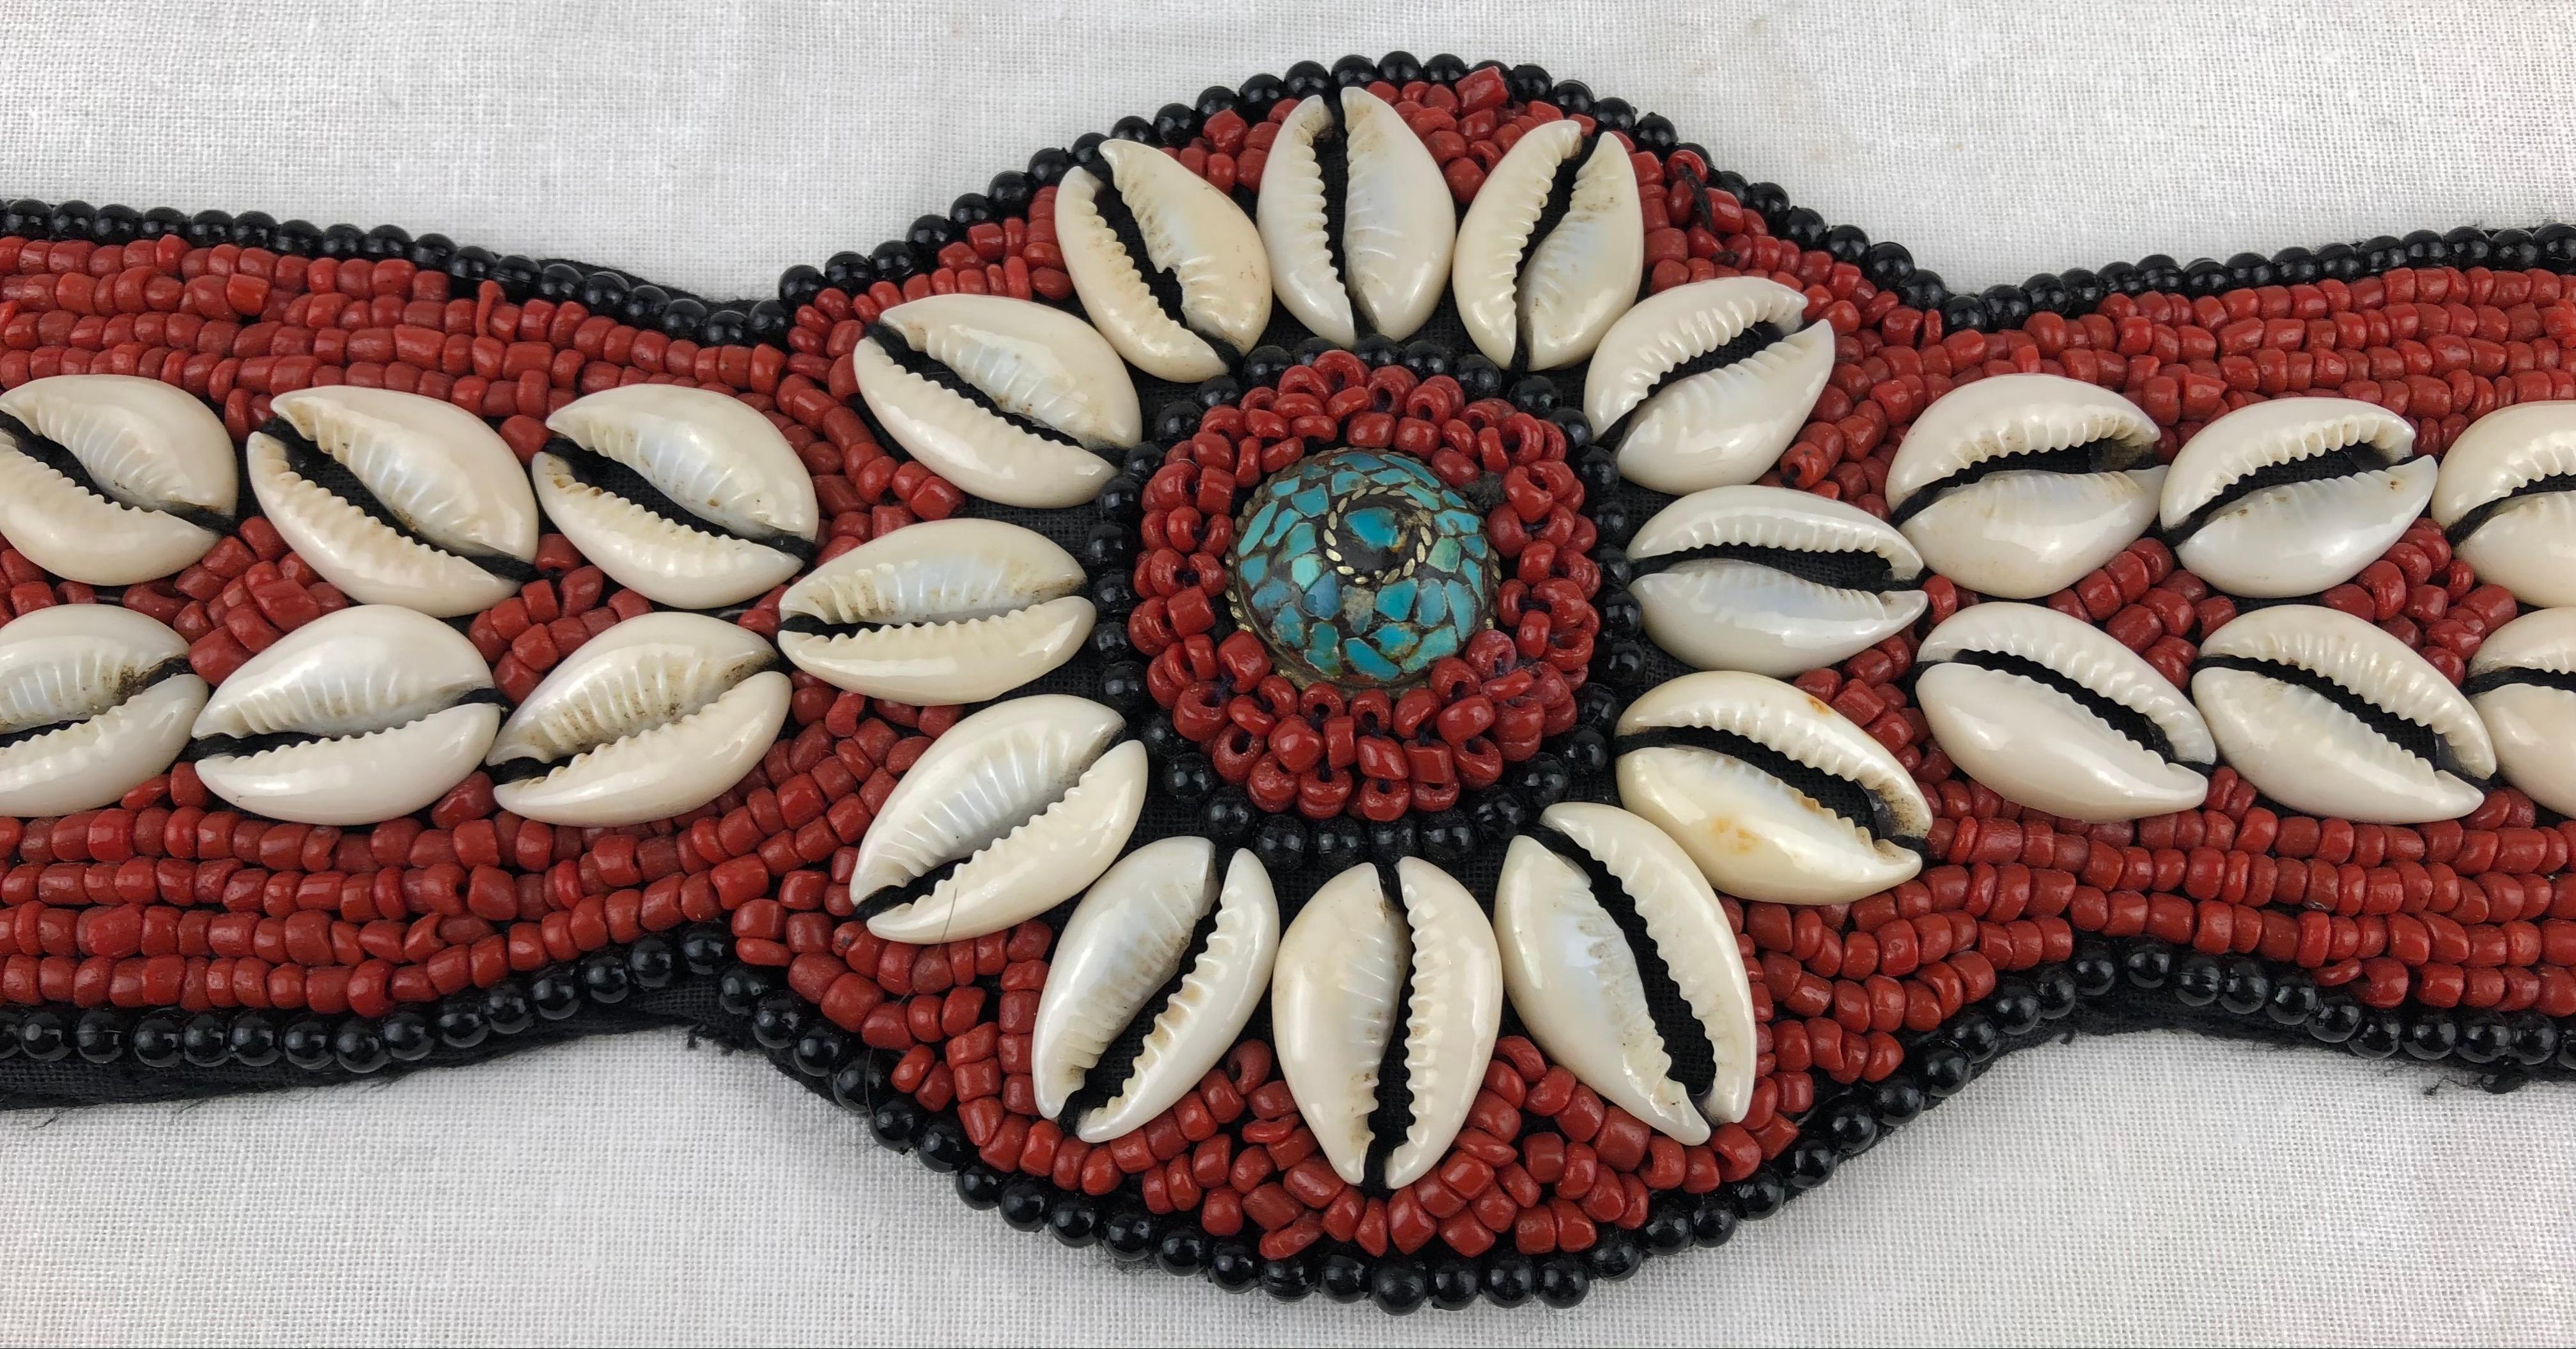 A stunning hand-crafted belt featuring a beautiful turquoise stone. This very decorative native belt attributed to the Shinnecock People of the United States of America would look wonderful framed and hung as a wall decoration. 

Stunning